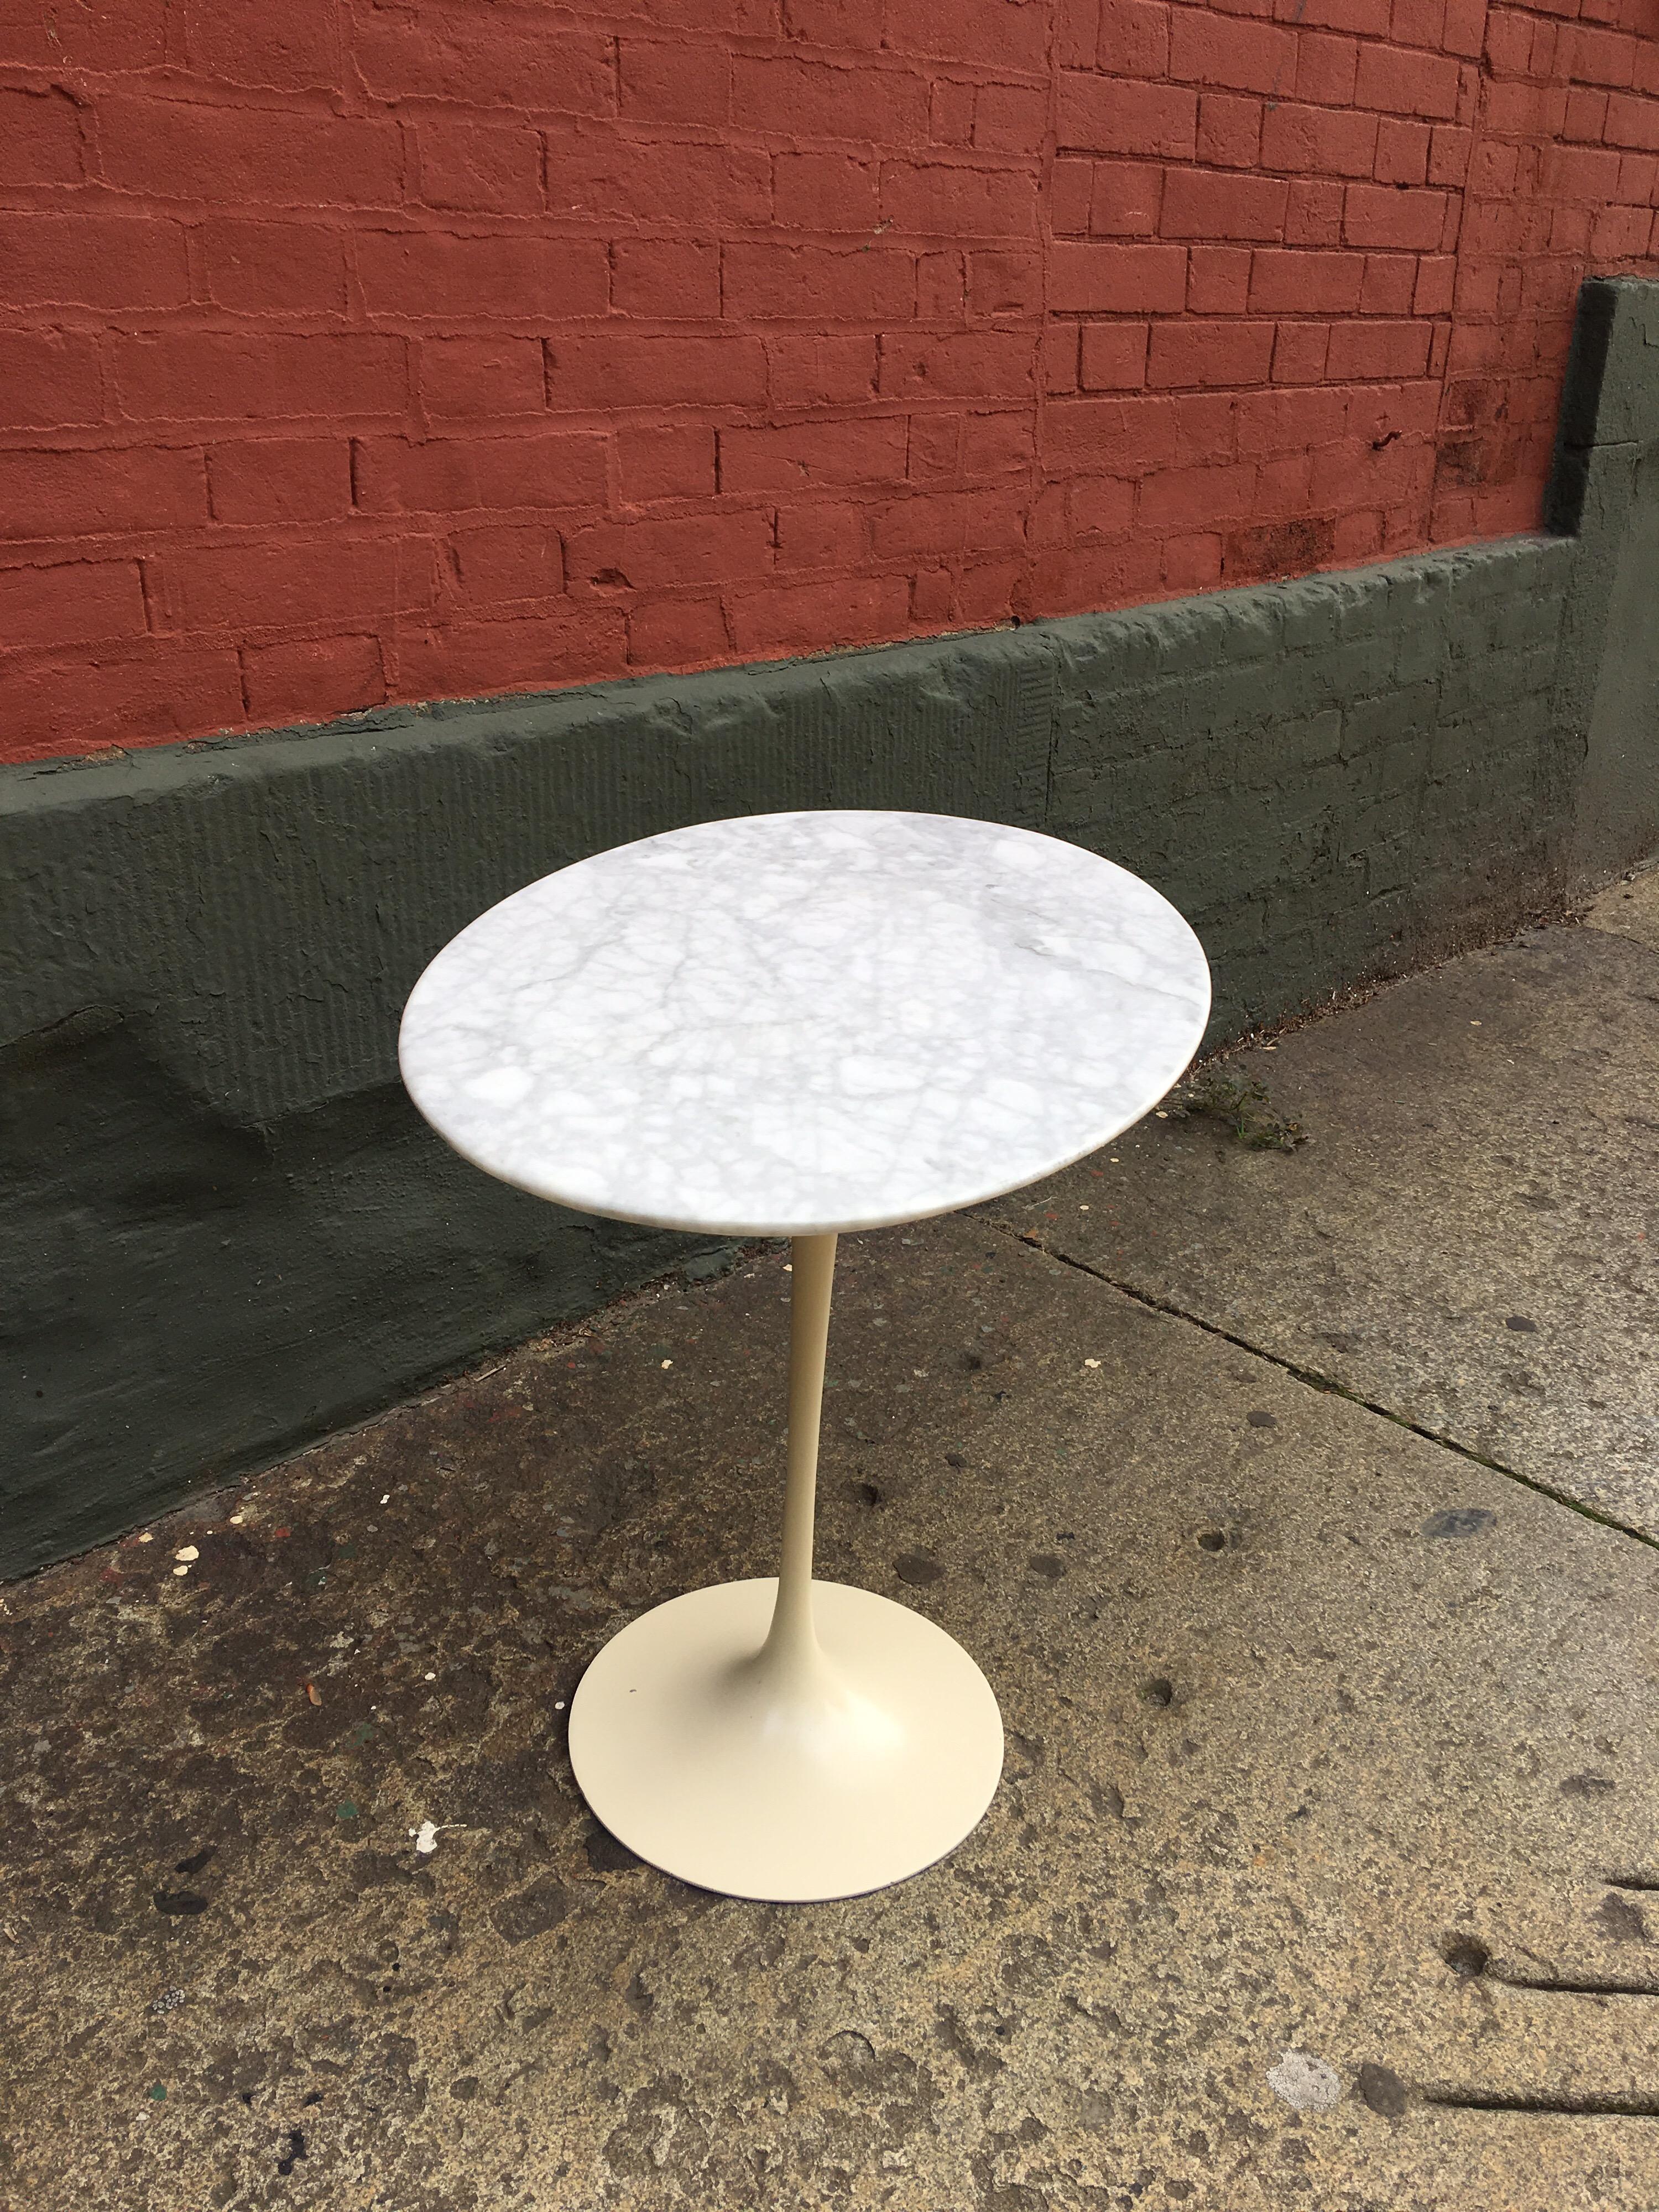 Classic Saarinen Tulip table in the Oval Design for Knoll! White marble with cream repainted base. Great size easy to use in multiple places!